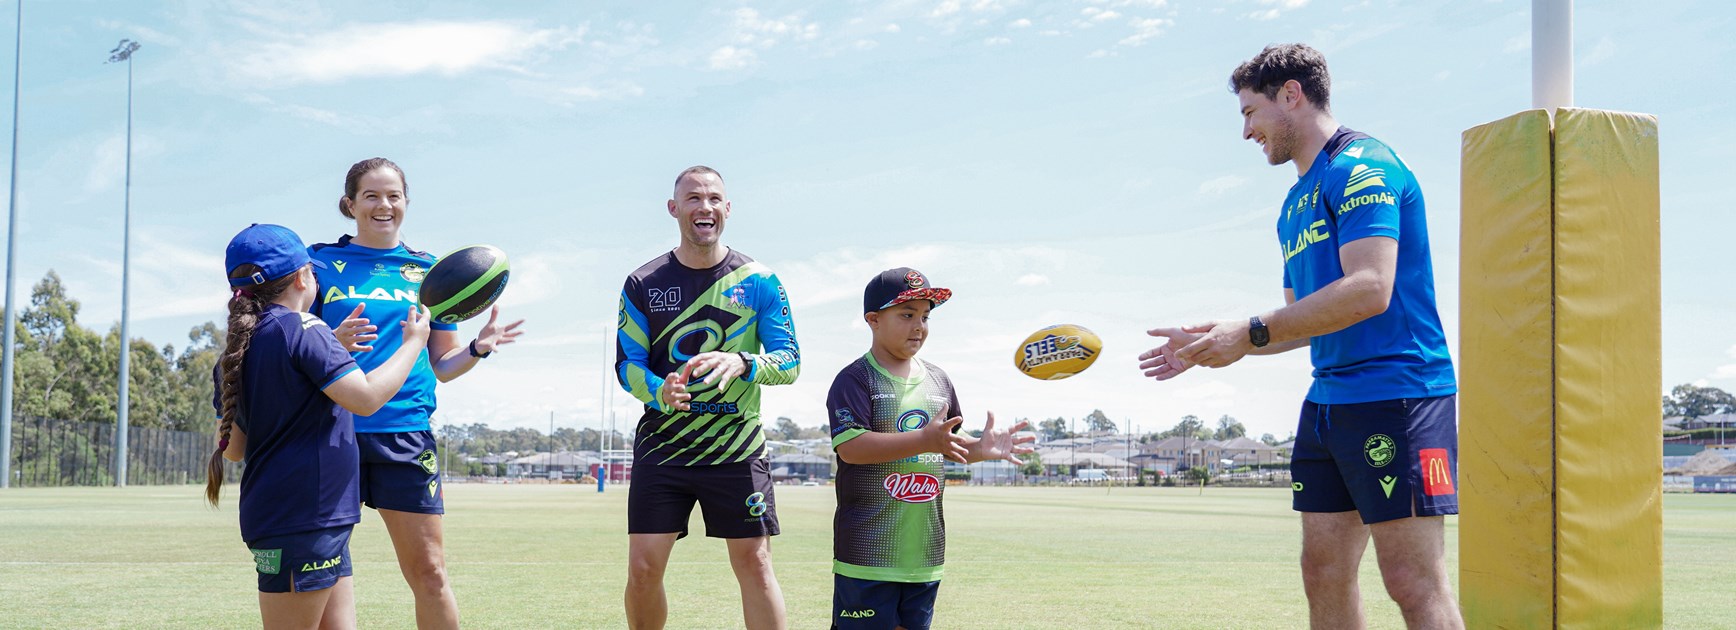 Eels Play x Motiv8sports holiday camp sells out in record time